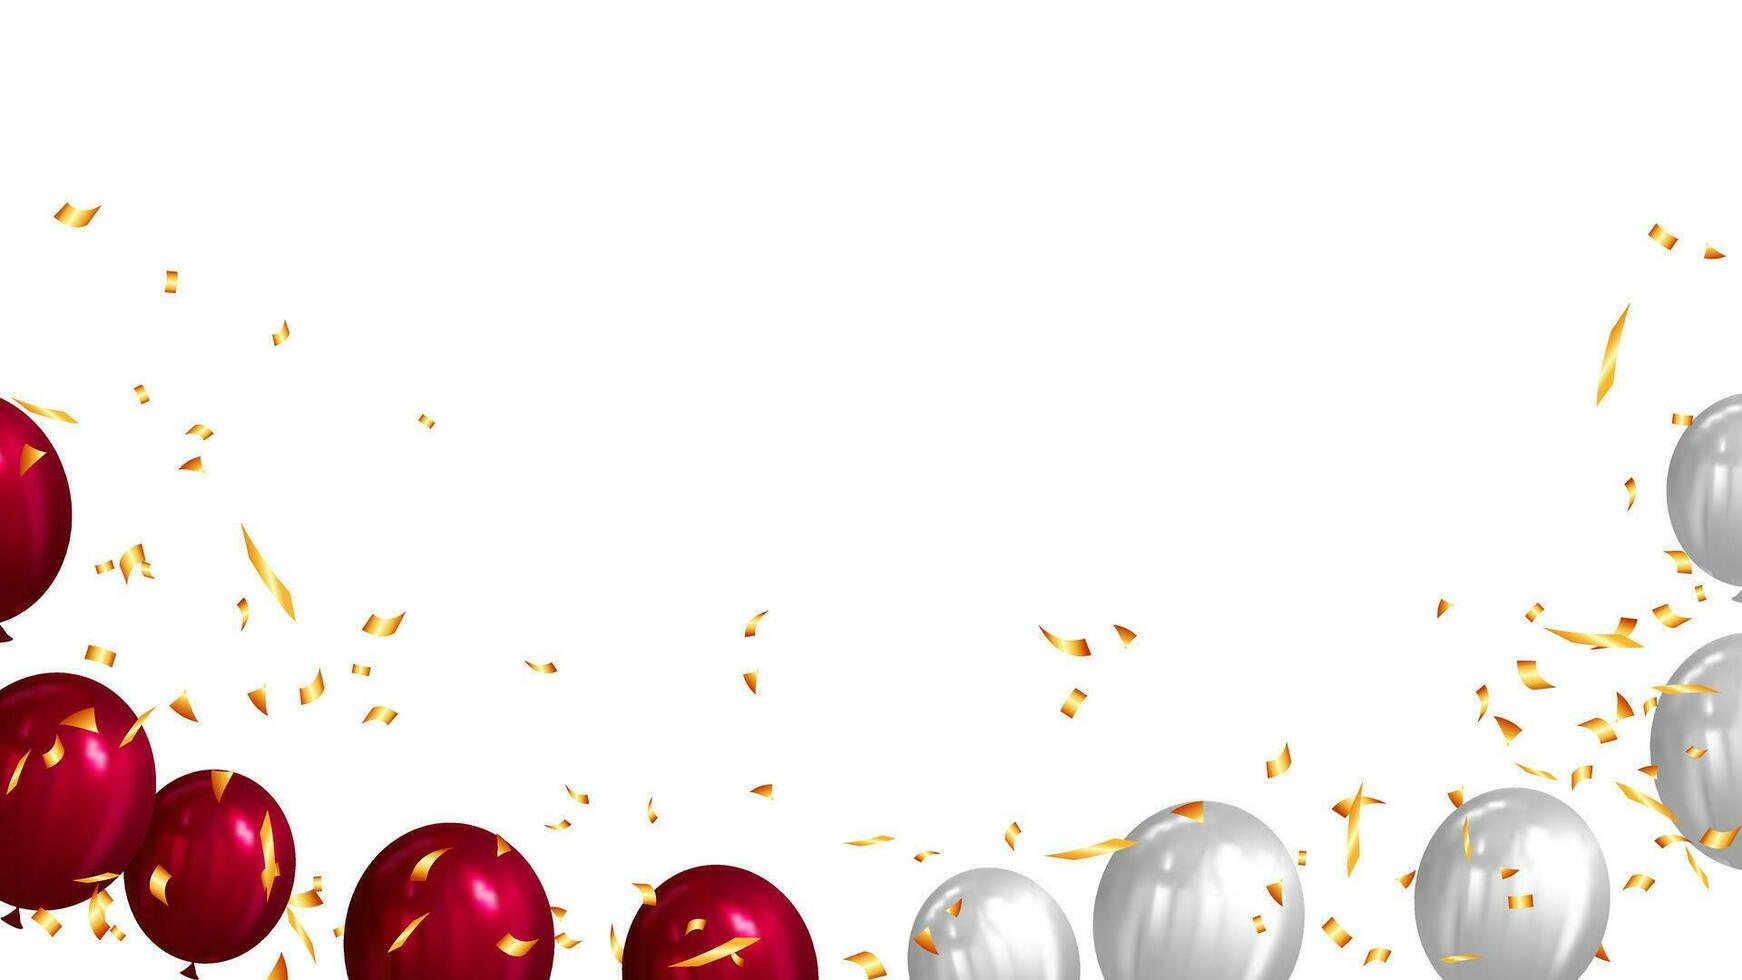 Merry Christmas greeting card design concept with realistic balloons. Happy new year vector